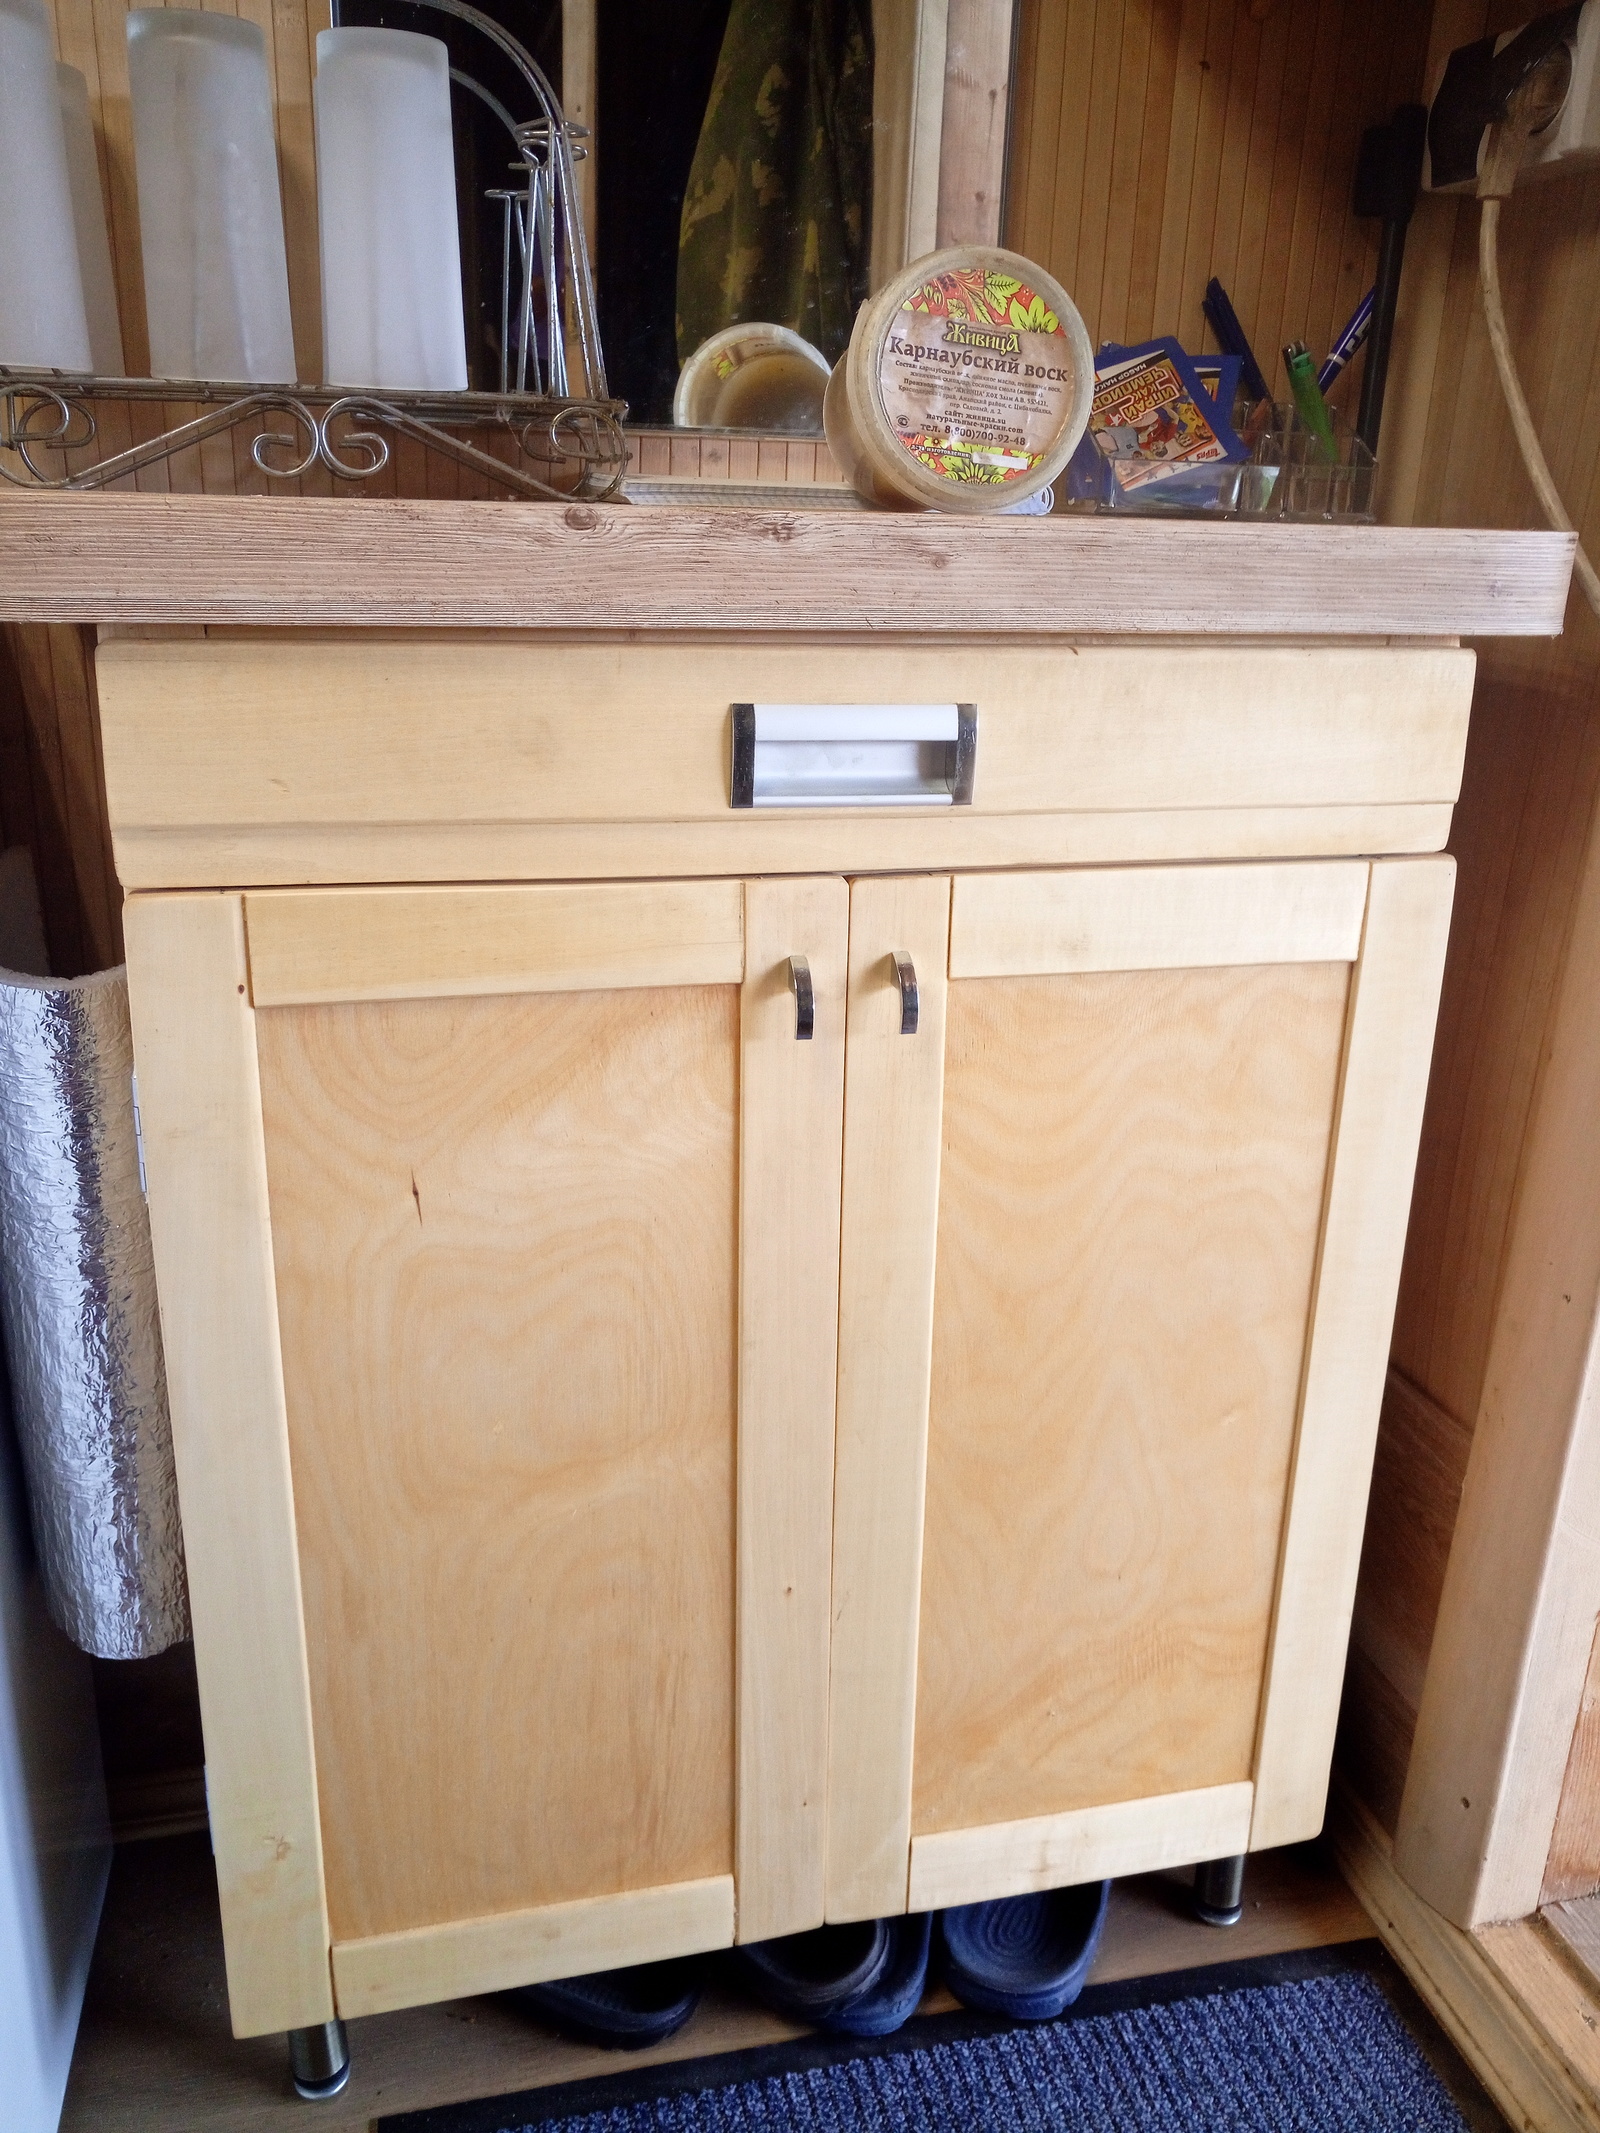 A little about homemade furniture - My, , Needlemen, Woodworking, Longpost, Furniture